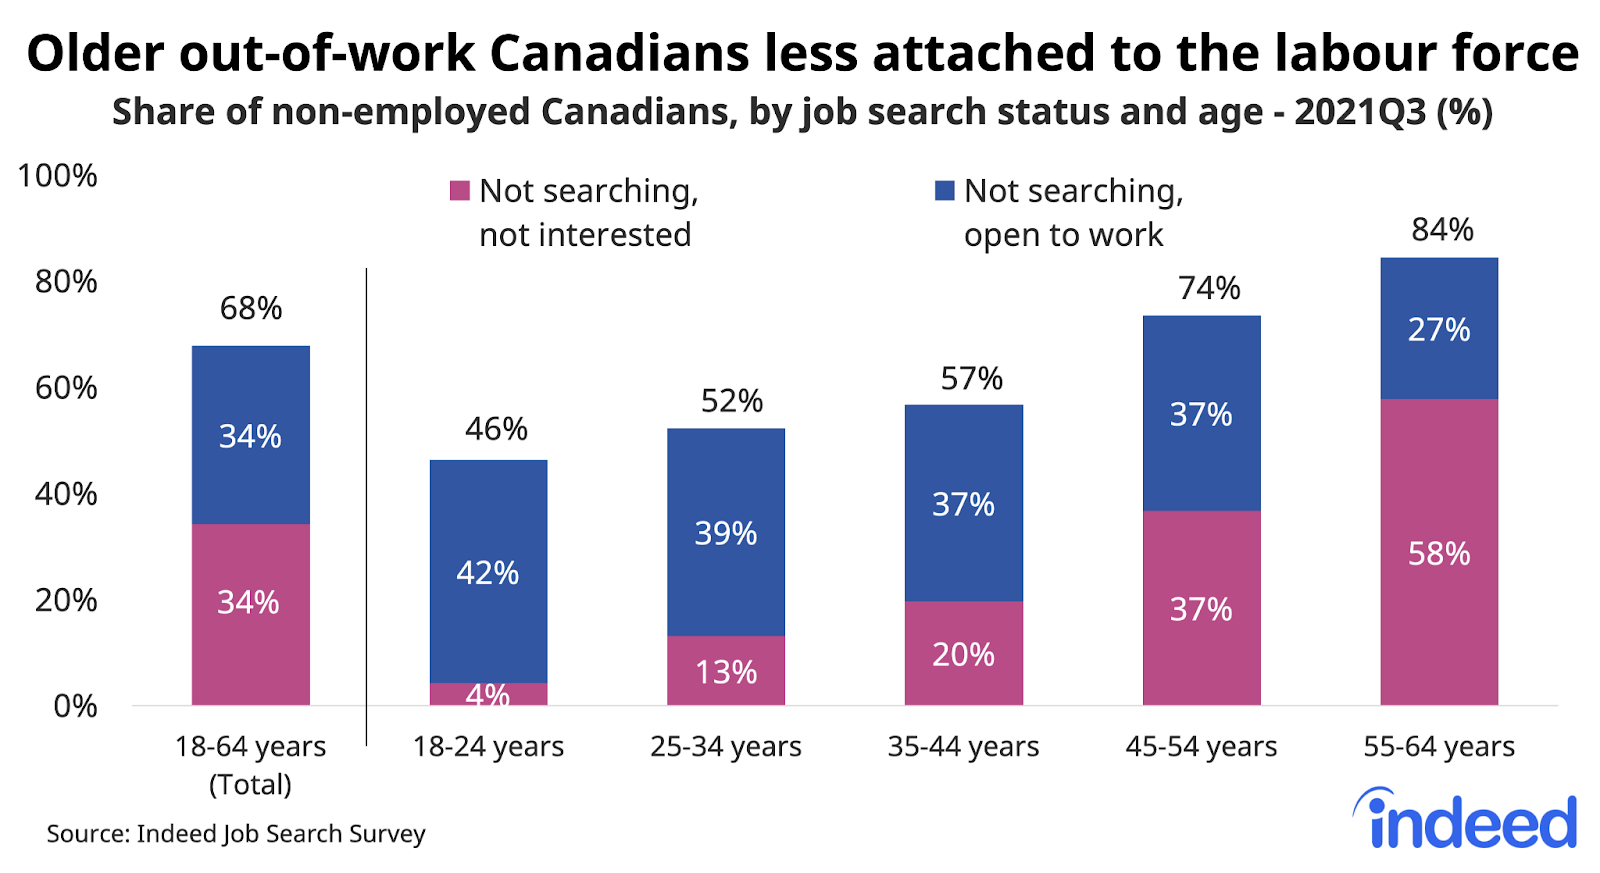 Bar chart titled “Older out-of-work Canadians less attached to the labour force.”